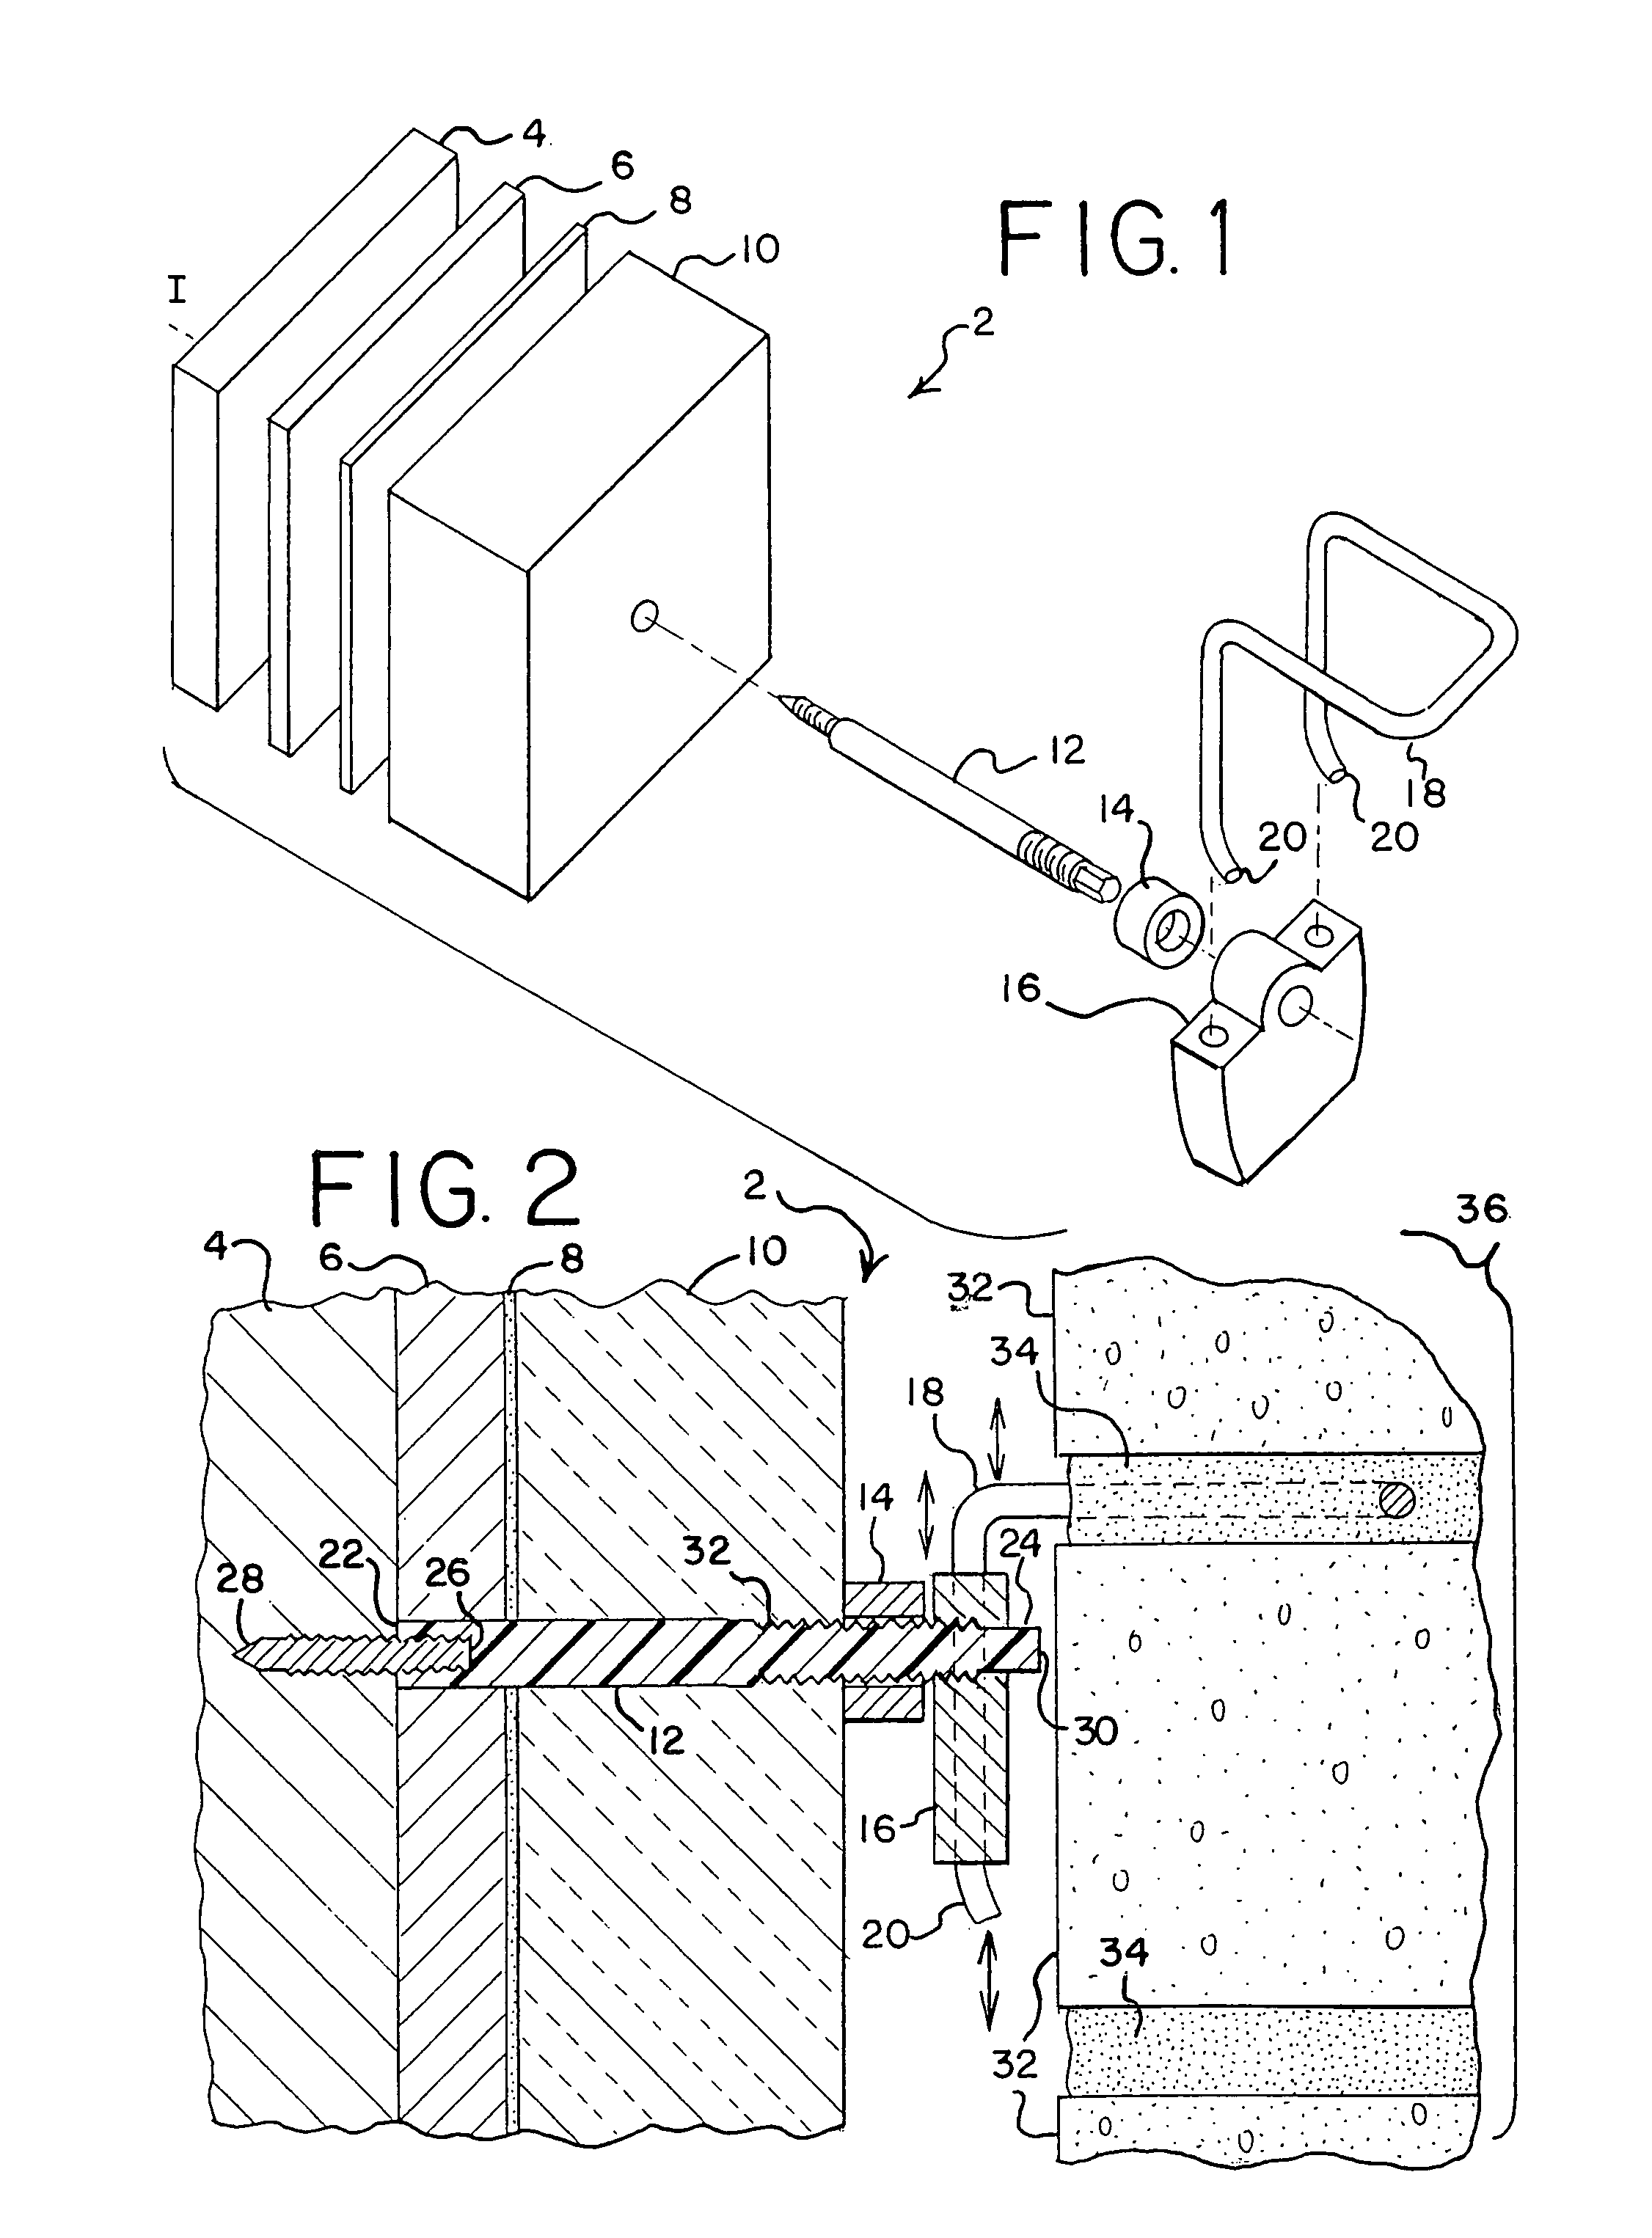 Composite fastener, belly nut, tie system and/or method for reducing heat transfer through a building envelope